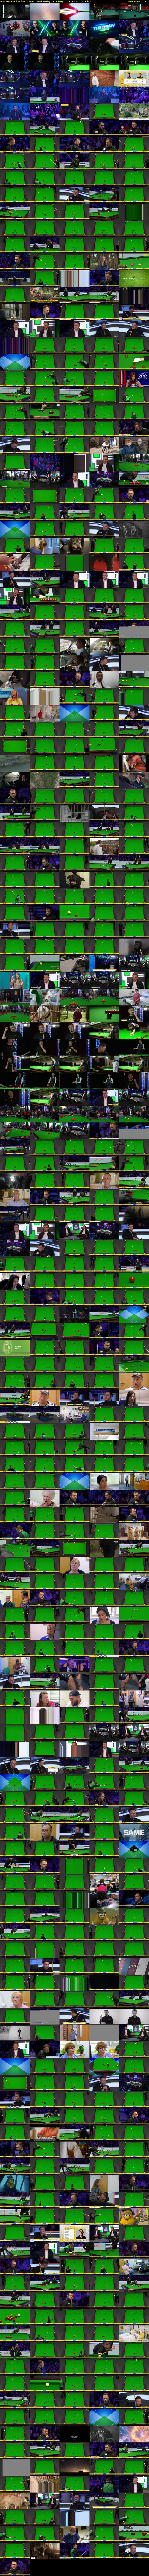 Masters Snooker (BBC TWO) Wednesday 12 January 2022 13:00 - 17:15